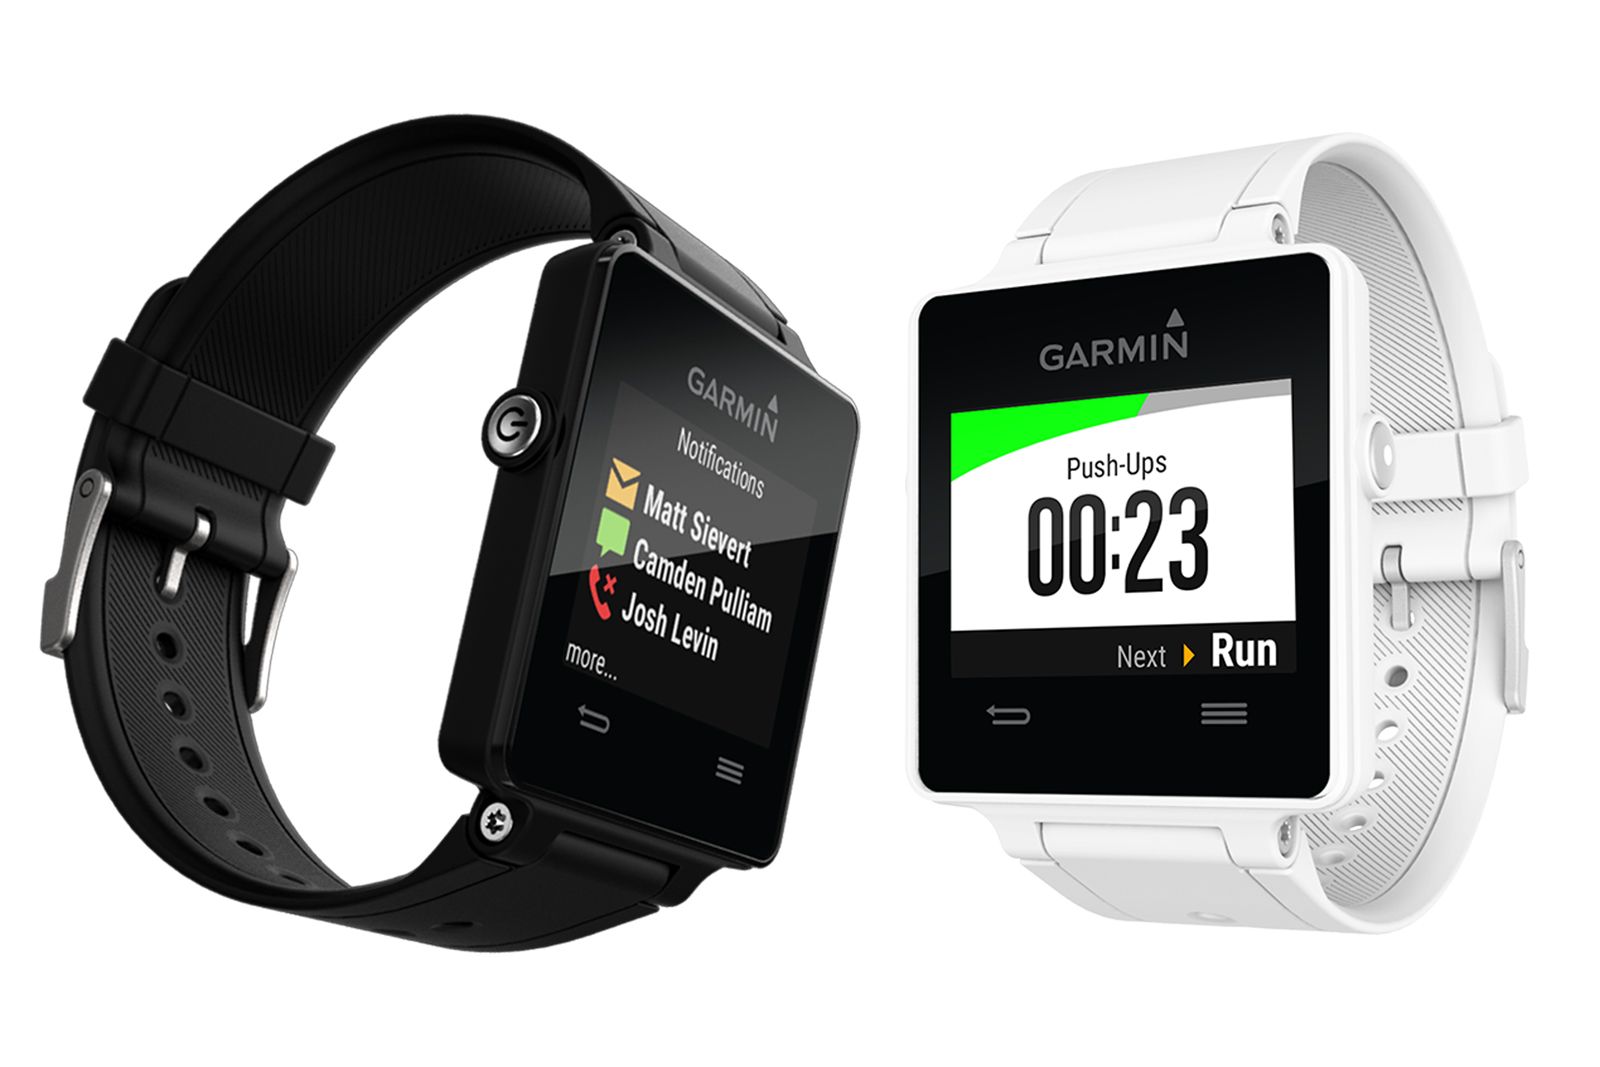 sports and fitness wearables to look forward to in 2015 image 9